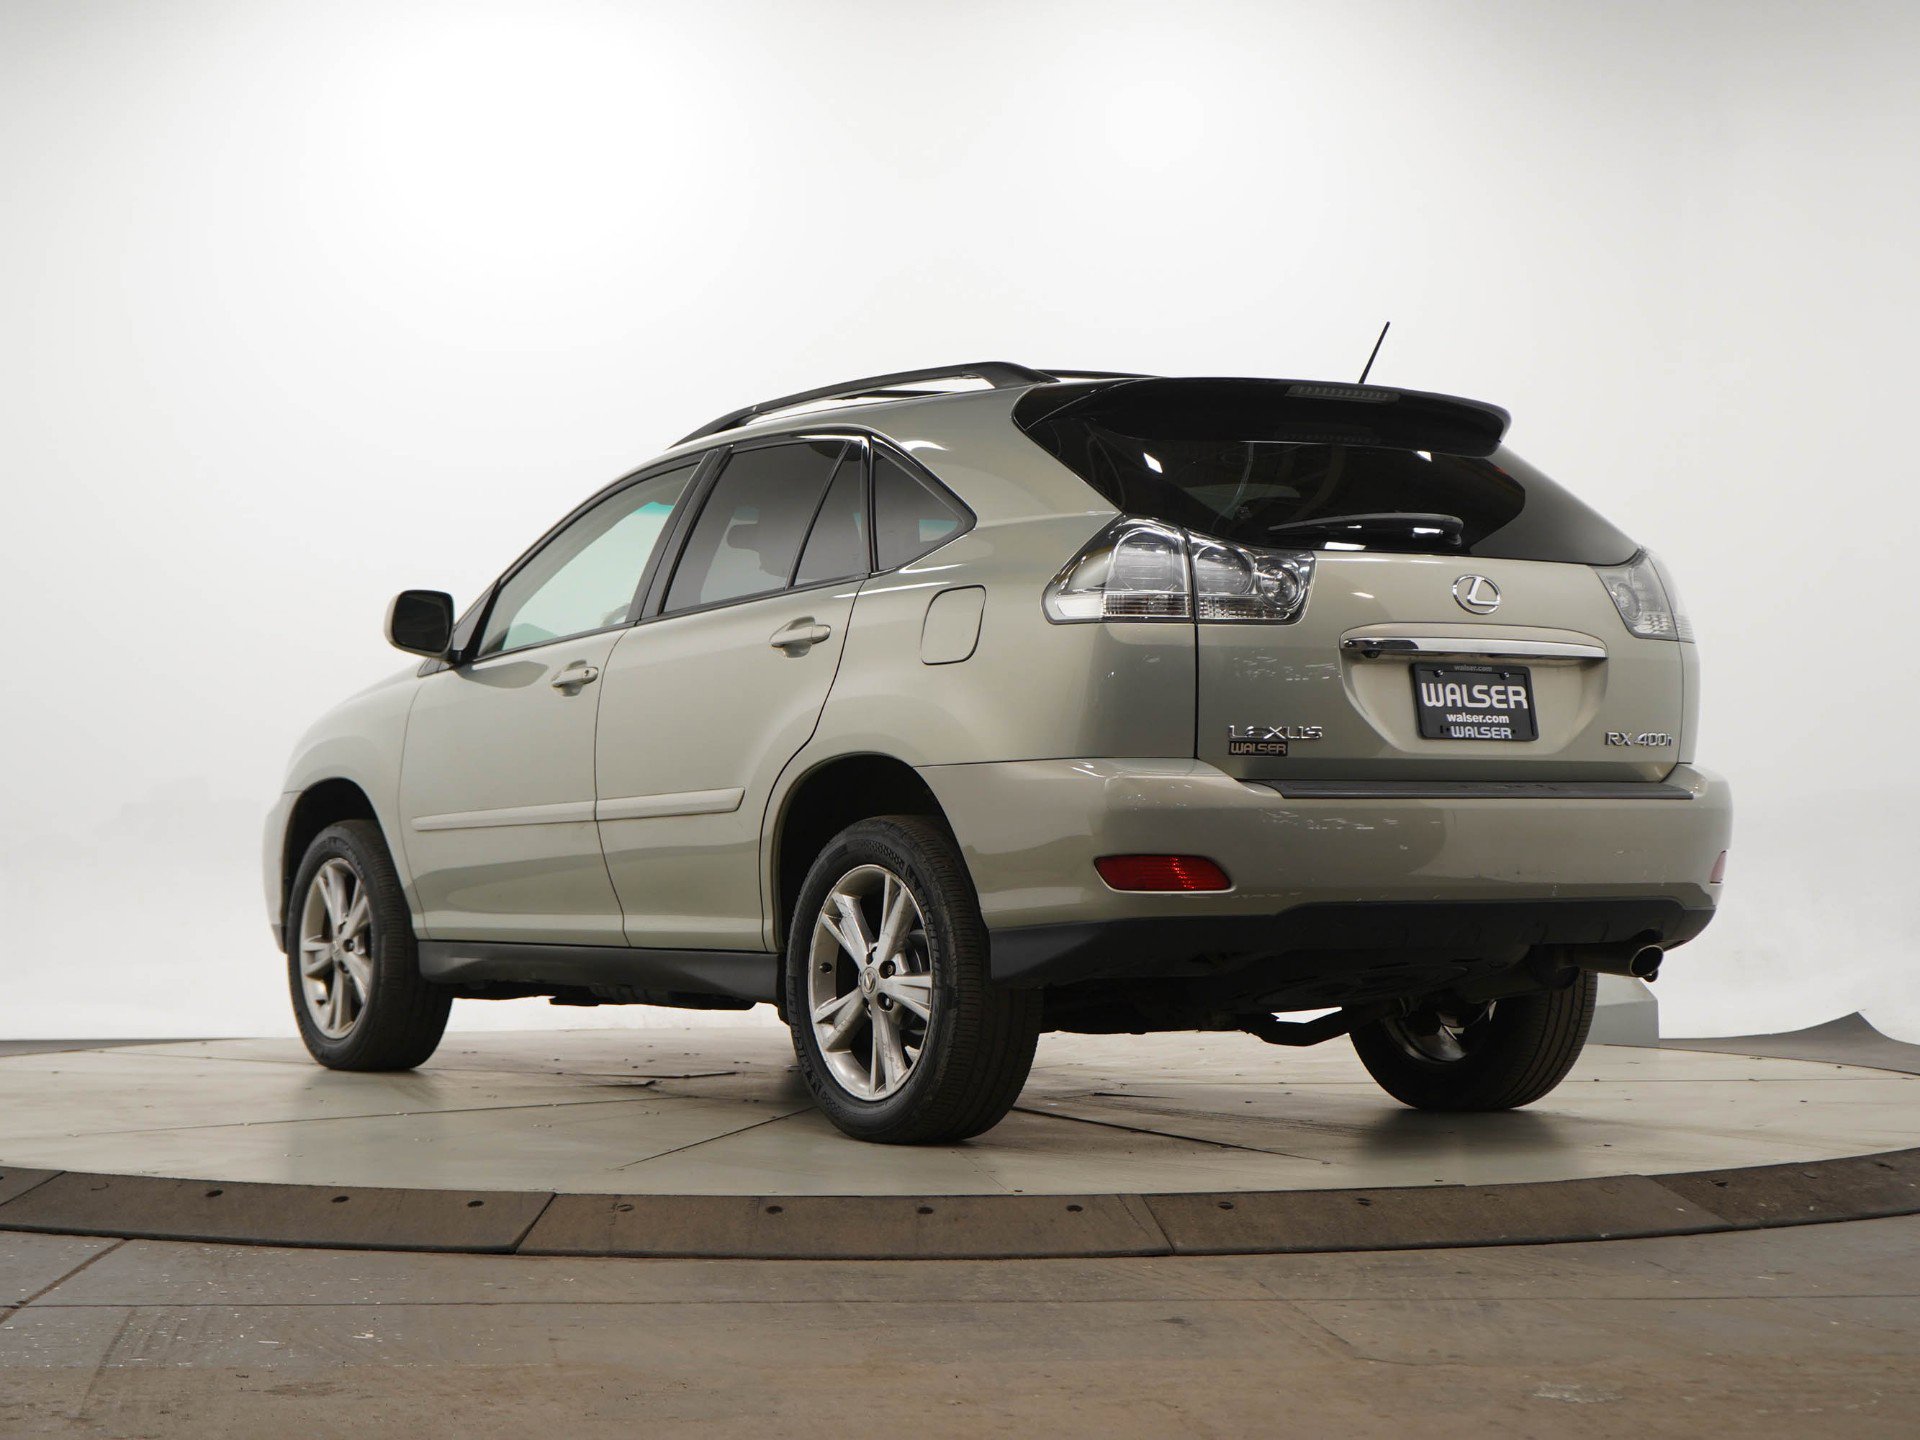 Pre-Owned 2006 Lexus Rx 400H AWD Sport Utility in West Bloomington  #14CD259P | Walser Toyota